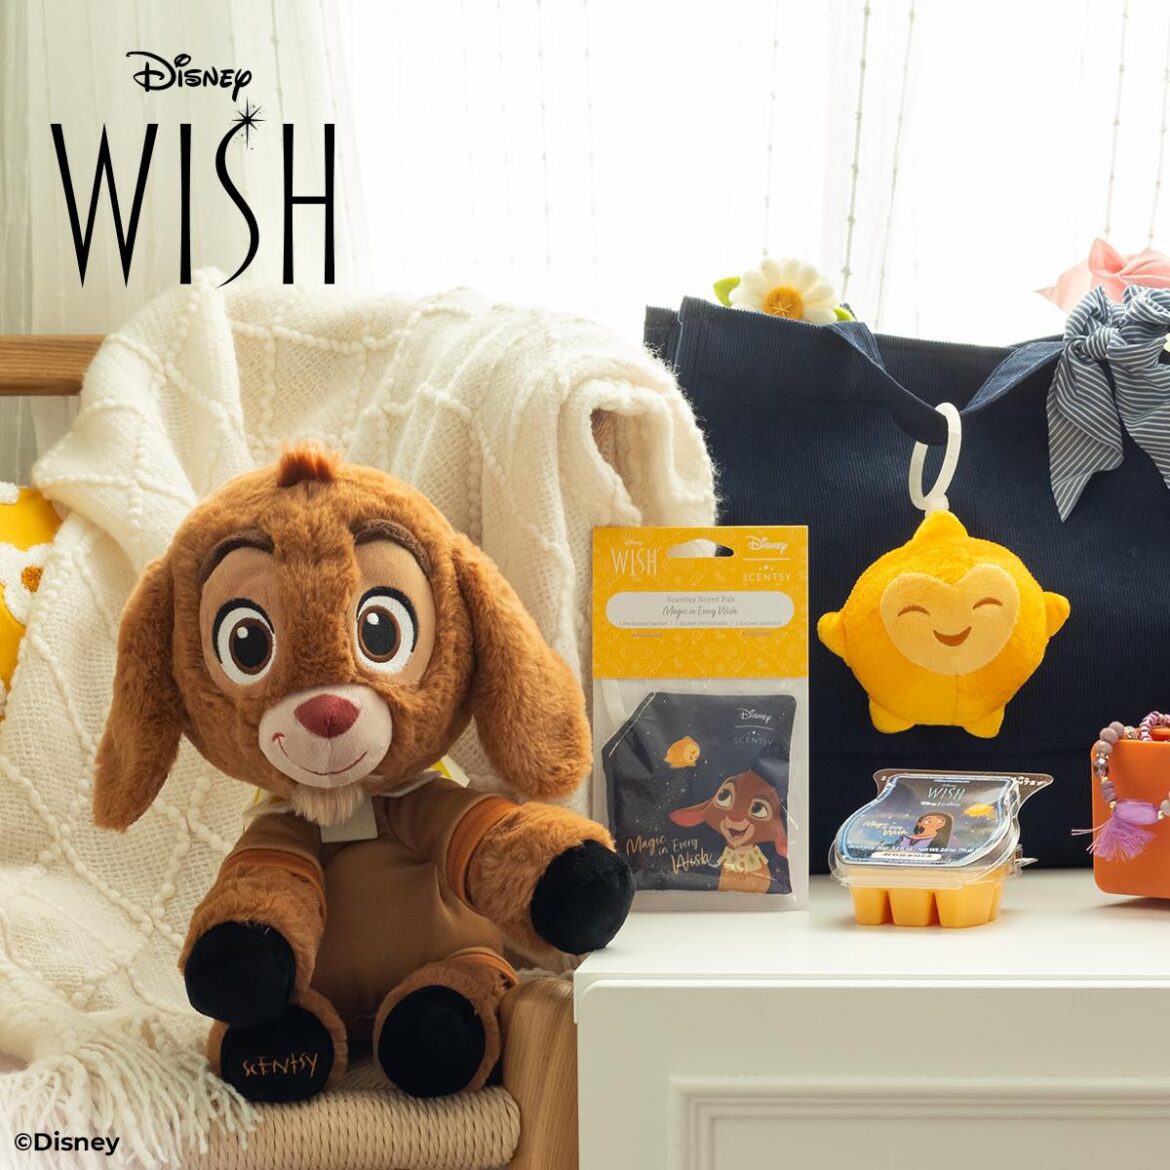 Time to shine with Disney’s Wish Collection from Scentsy